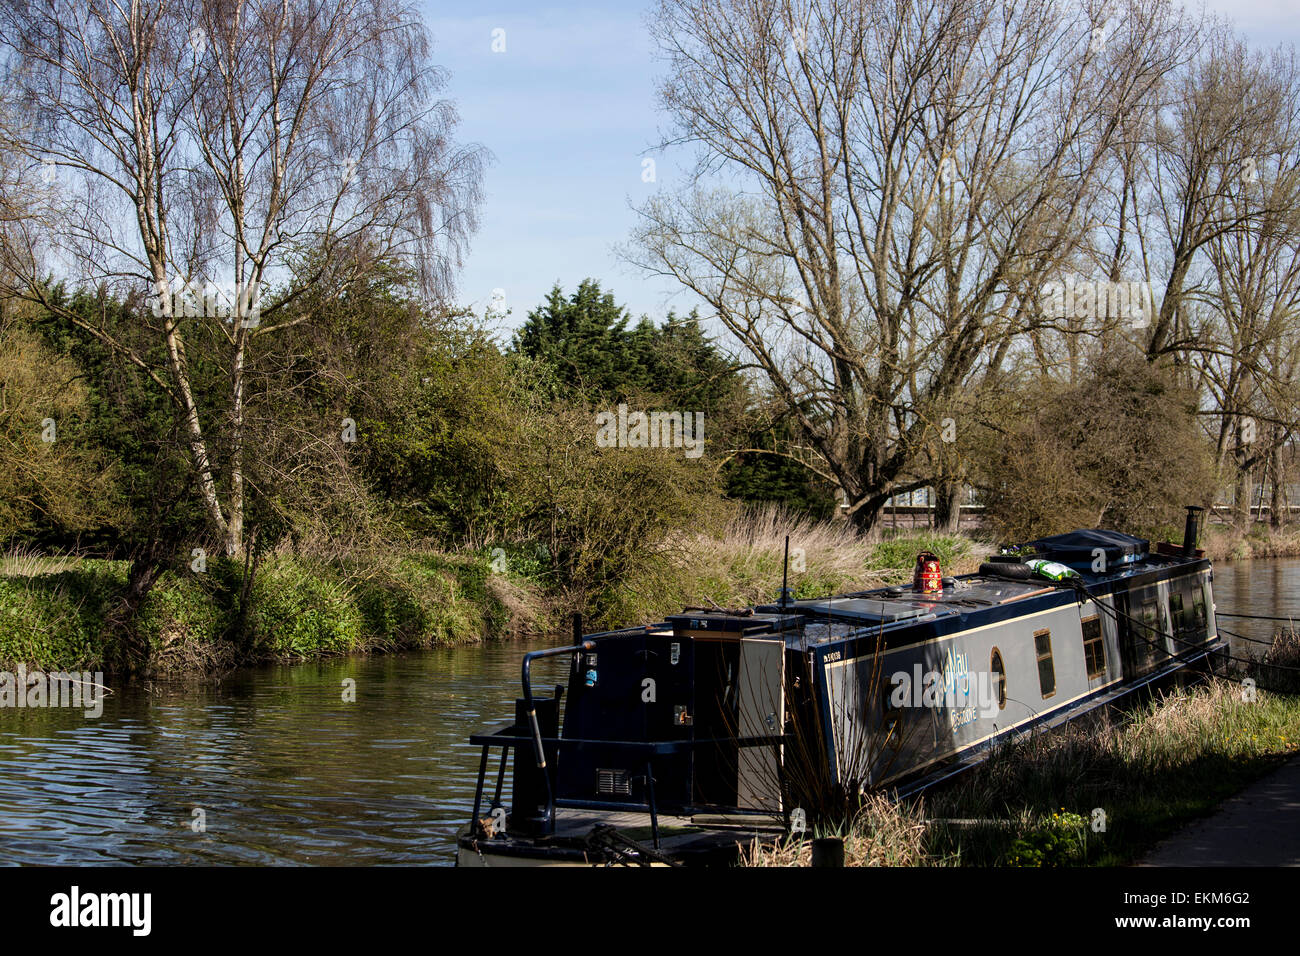 Narrow boat on the River Stort Stock Photo